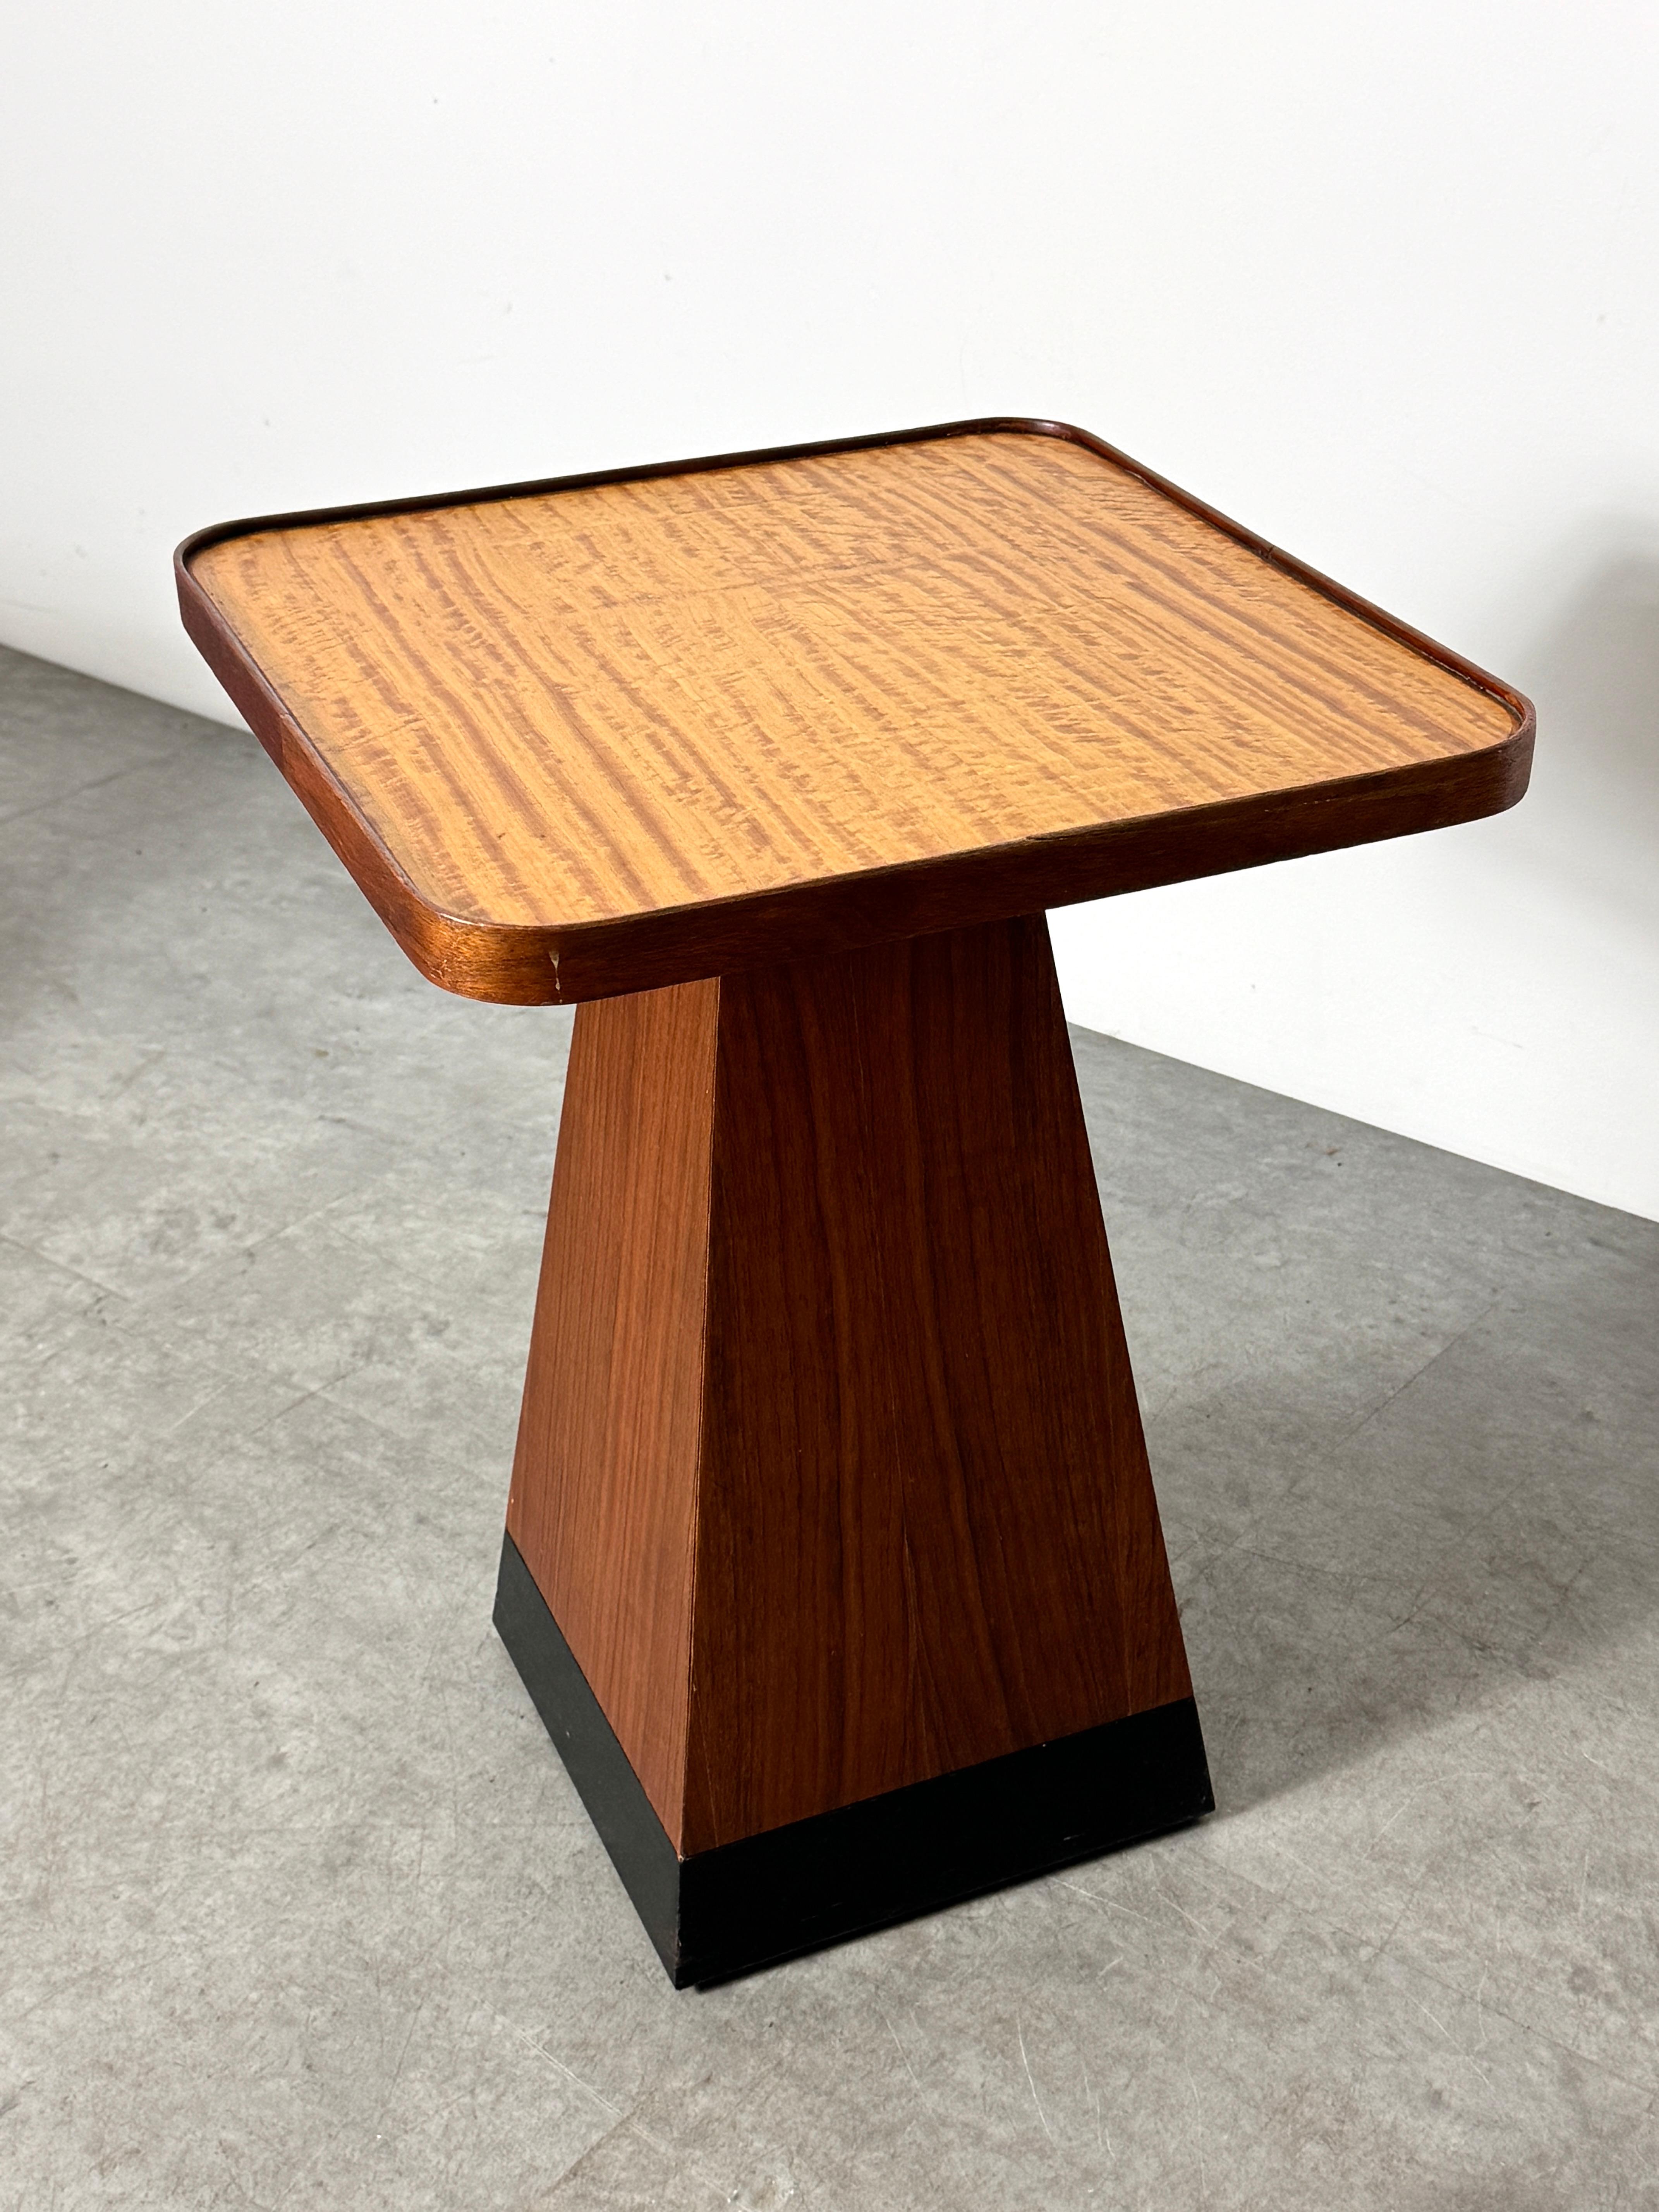 American Mid Century Modern Walnut Satinwood Square Pyramid Side Pedestal Table 1970s For Sale